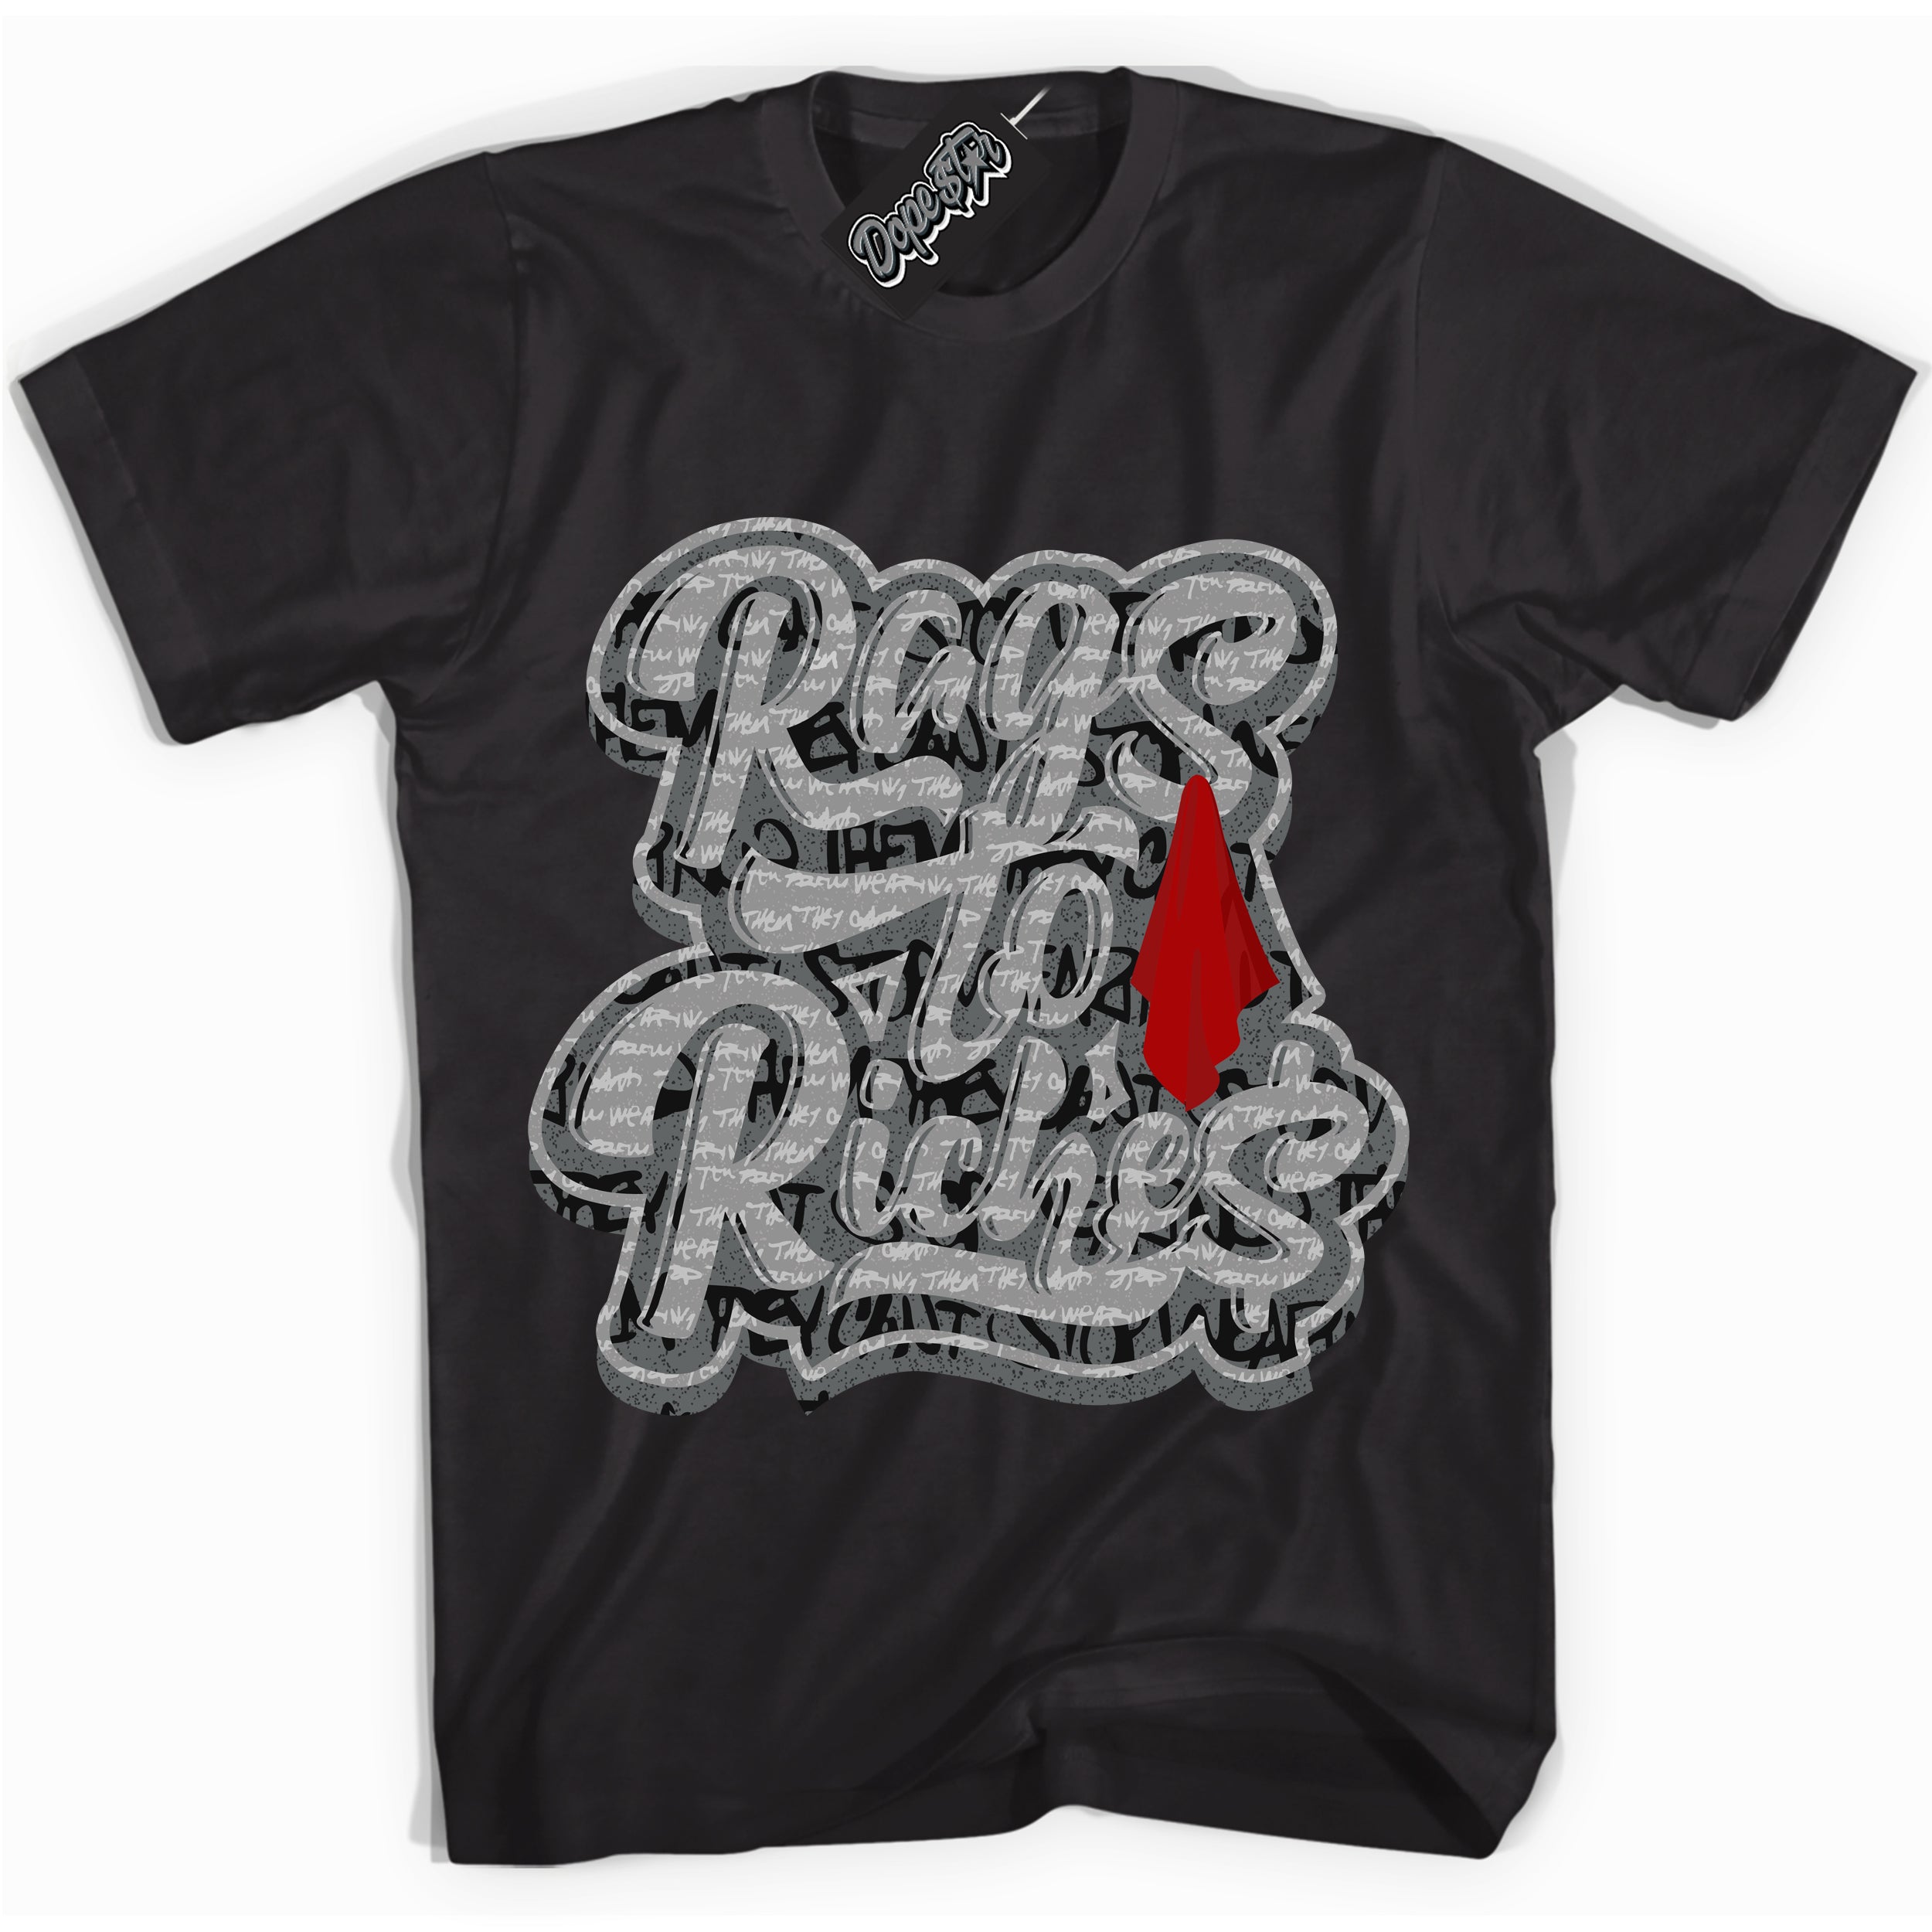 Cool Black Shirt with “ Rags To Riches ” design that perfectly matches Rebellionaire 1s Sneakers.